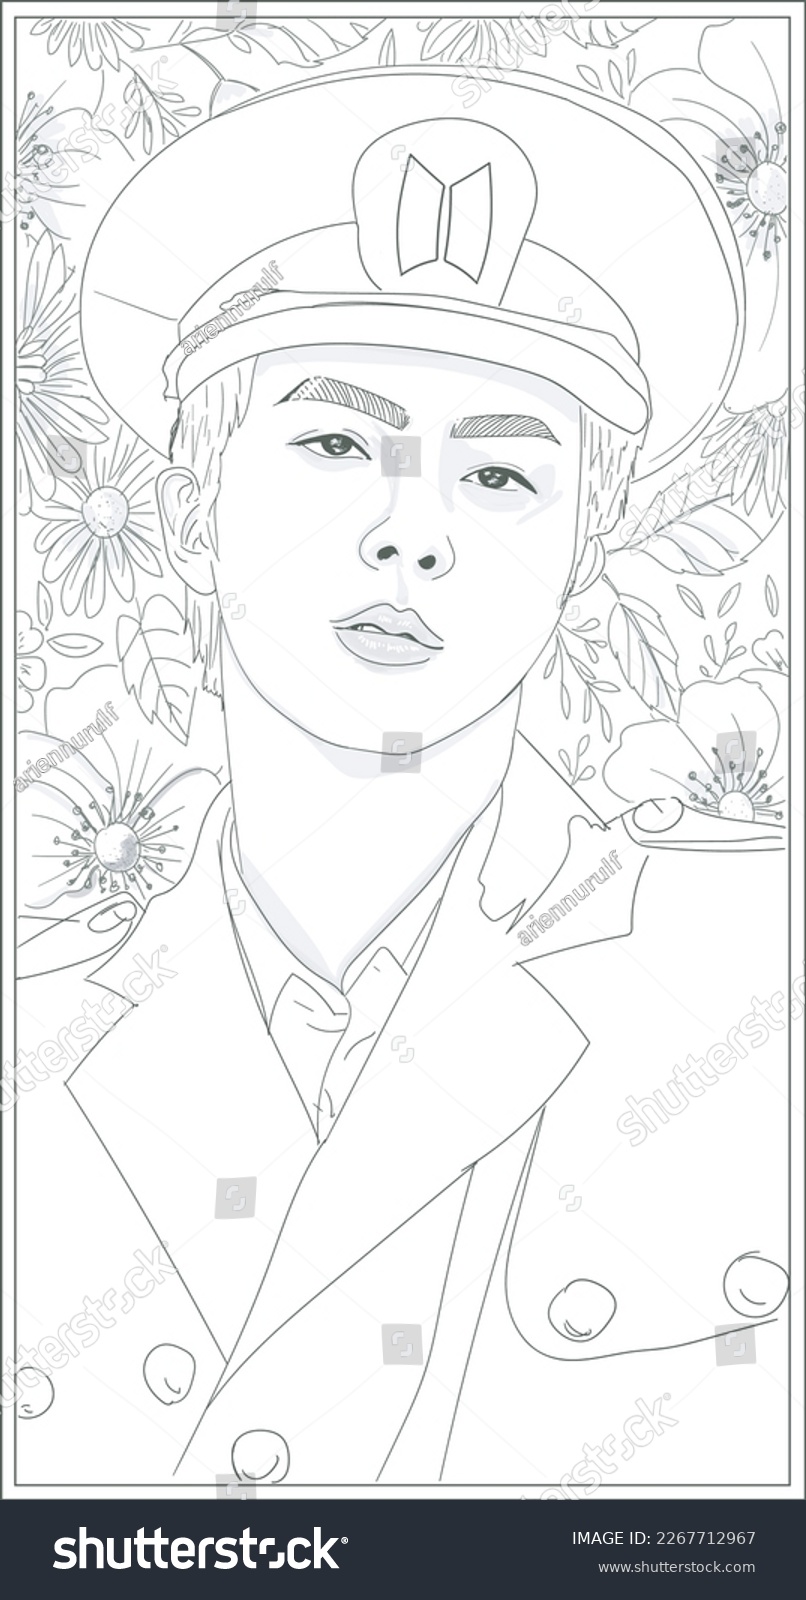 SVG of Line art vector illustration of a man with a perfectly handsome face. Background line art flowers and leaves. Can be used for adult coloring books svg